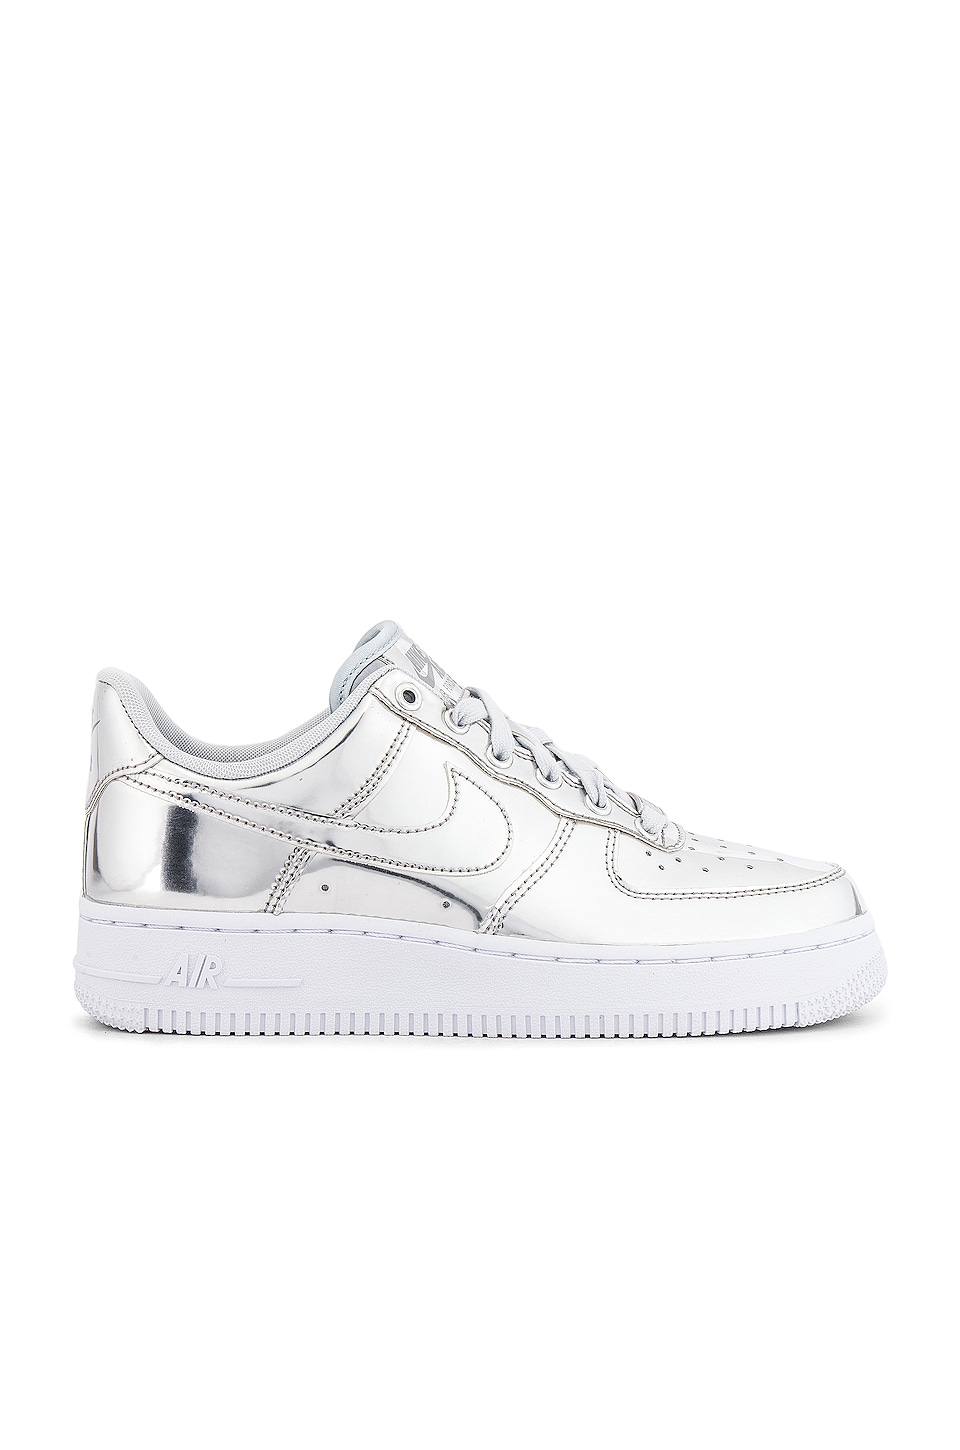 silver air forces